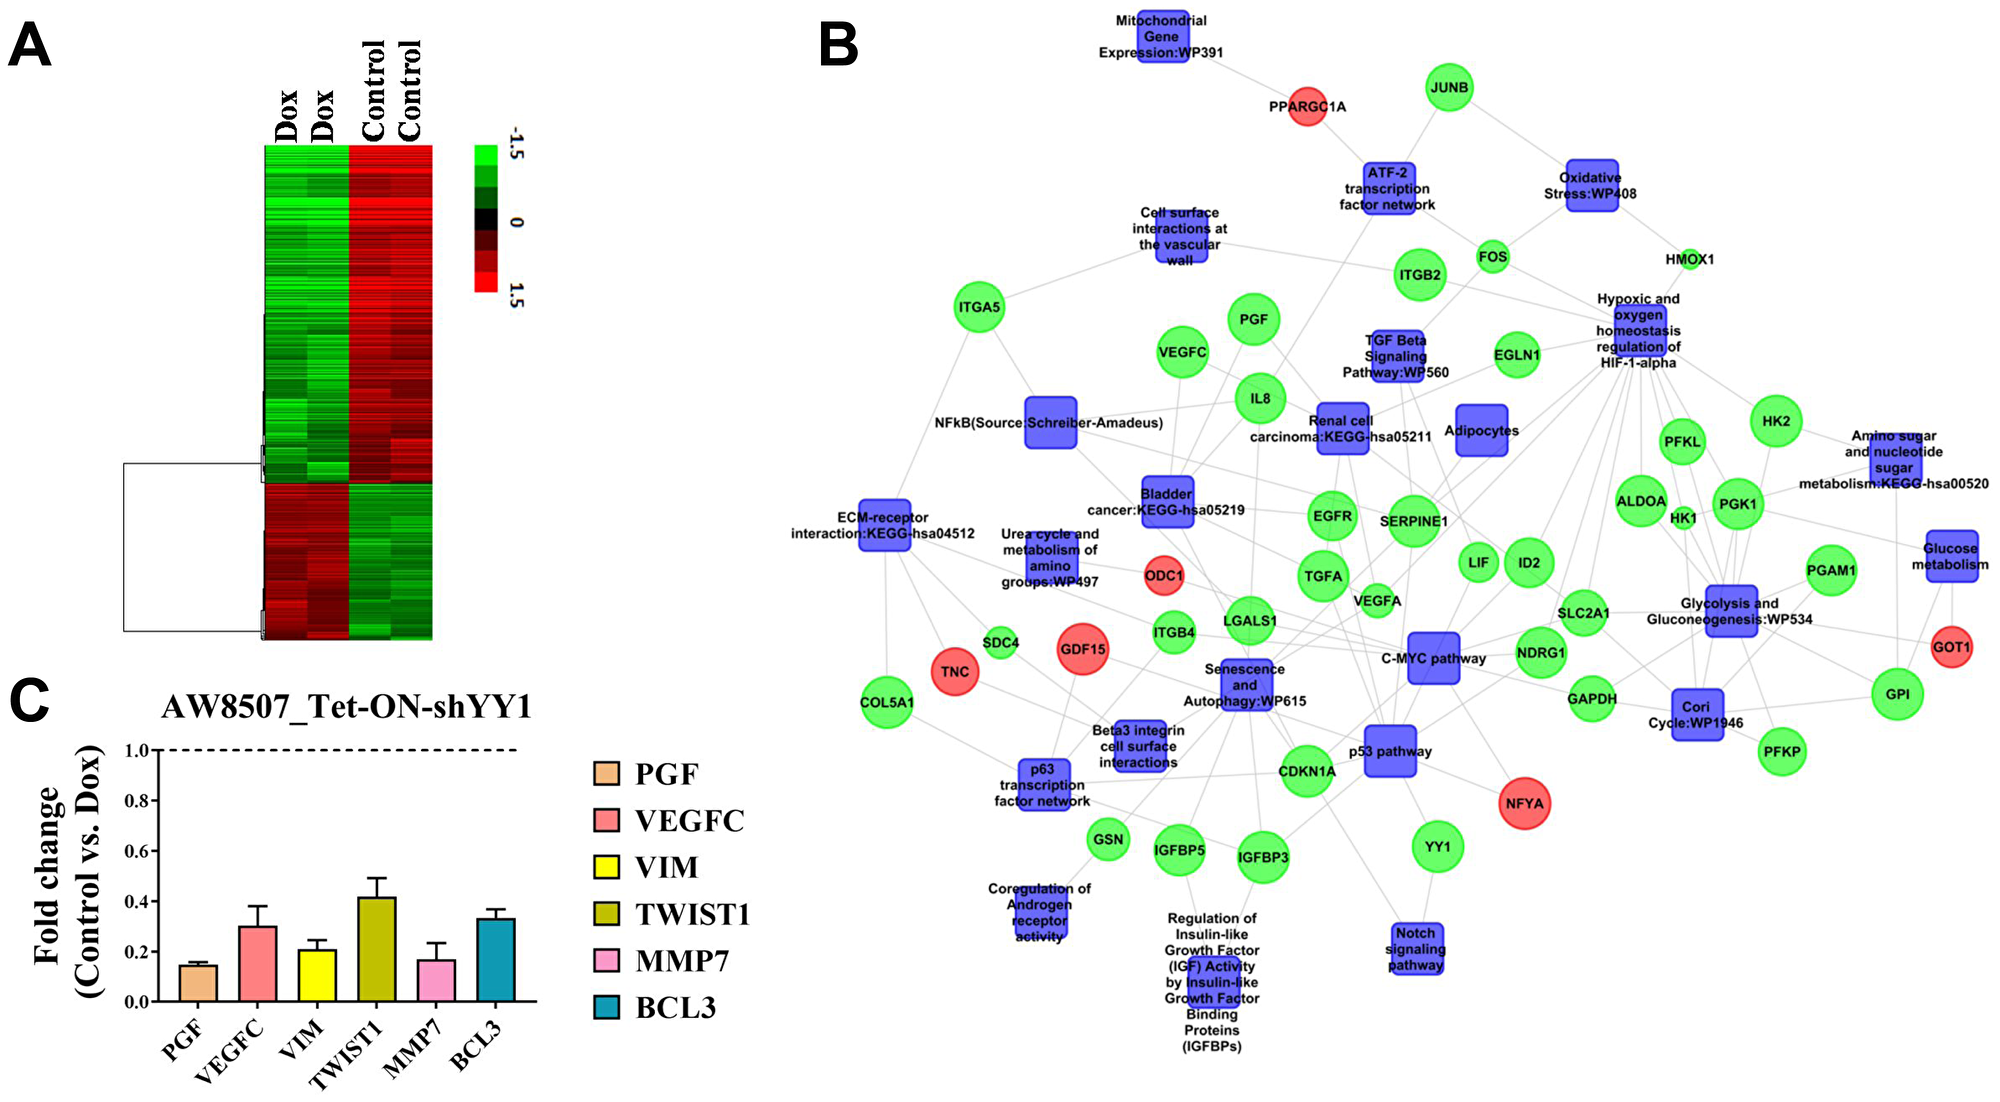 YY1 regulates multiple oncogenic pathways in oral cancer cells.